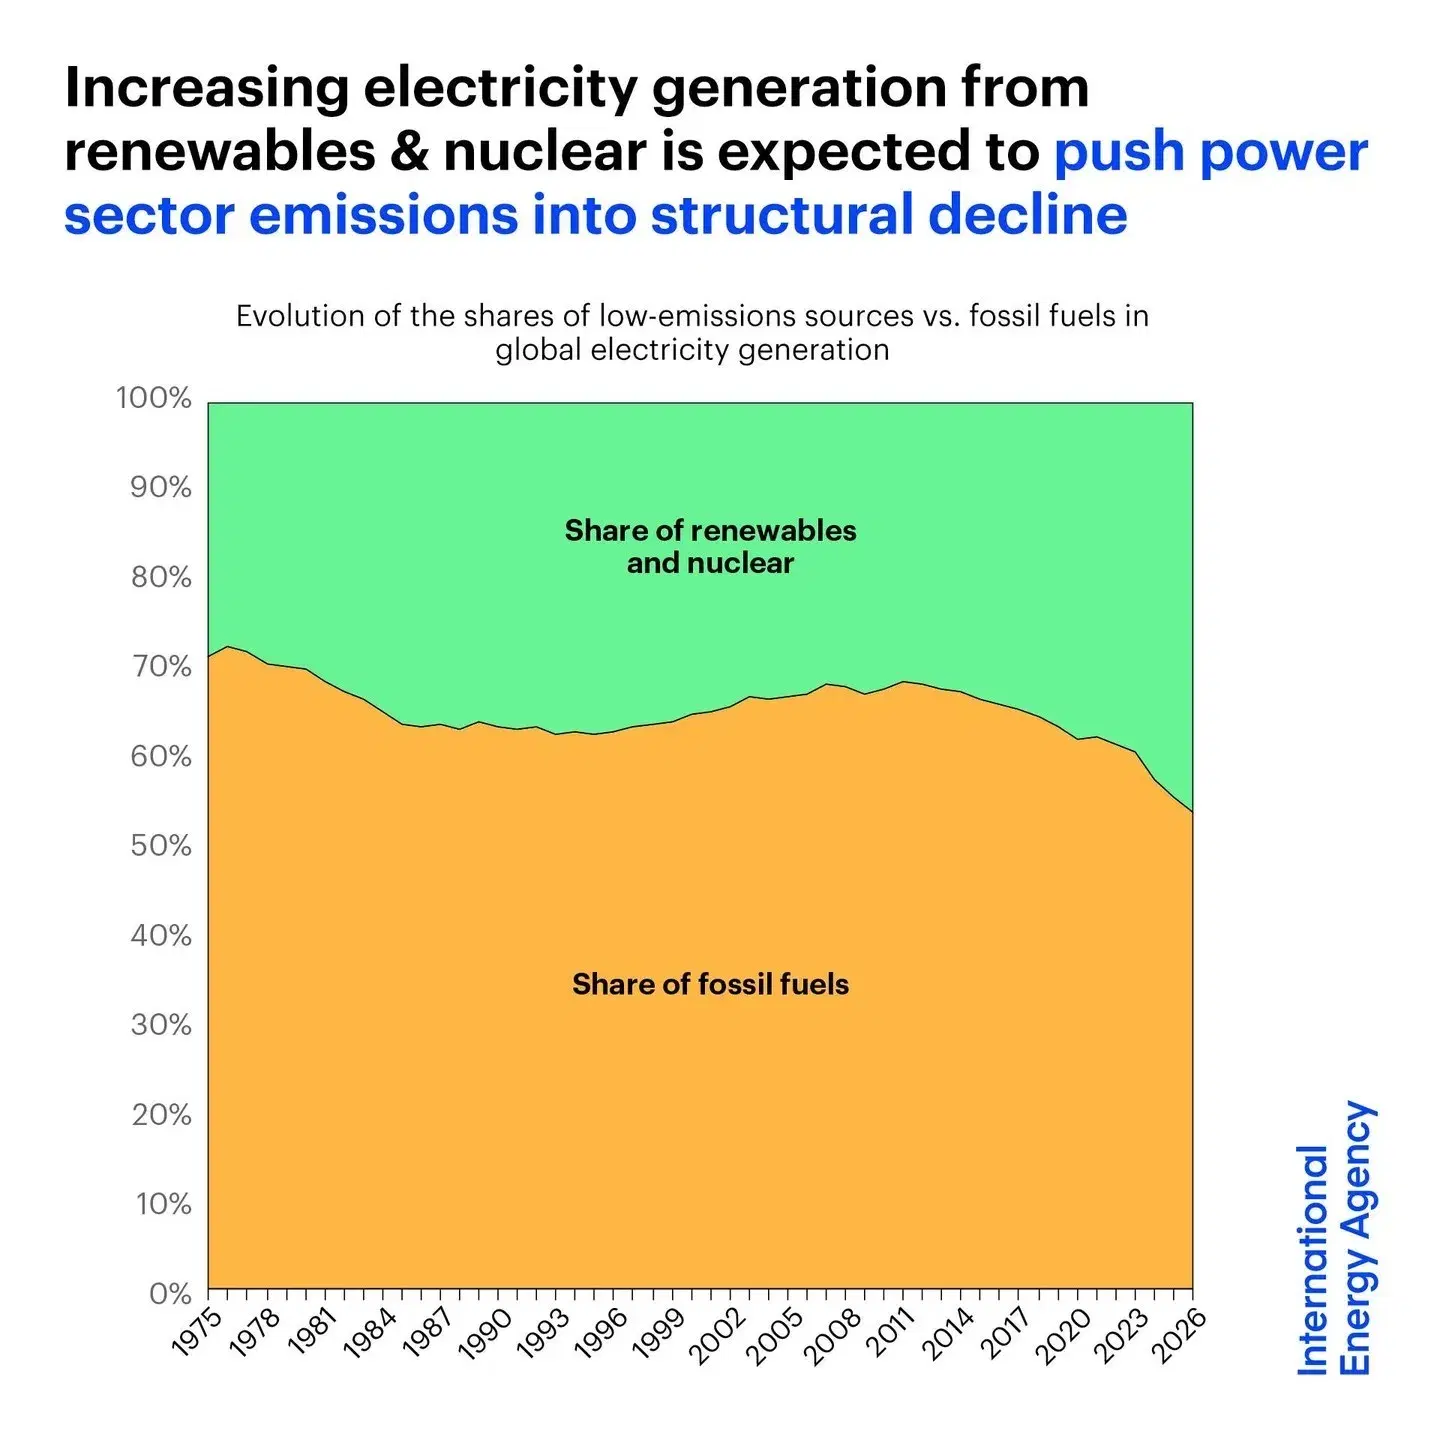 Low-emissions sources of electricity are on track to make up almost half of global generation by '26